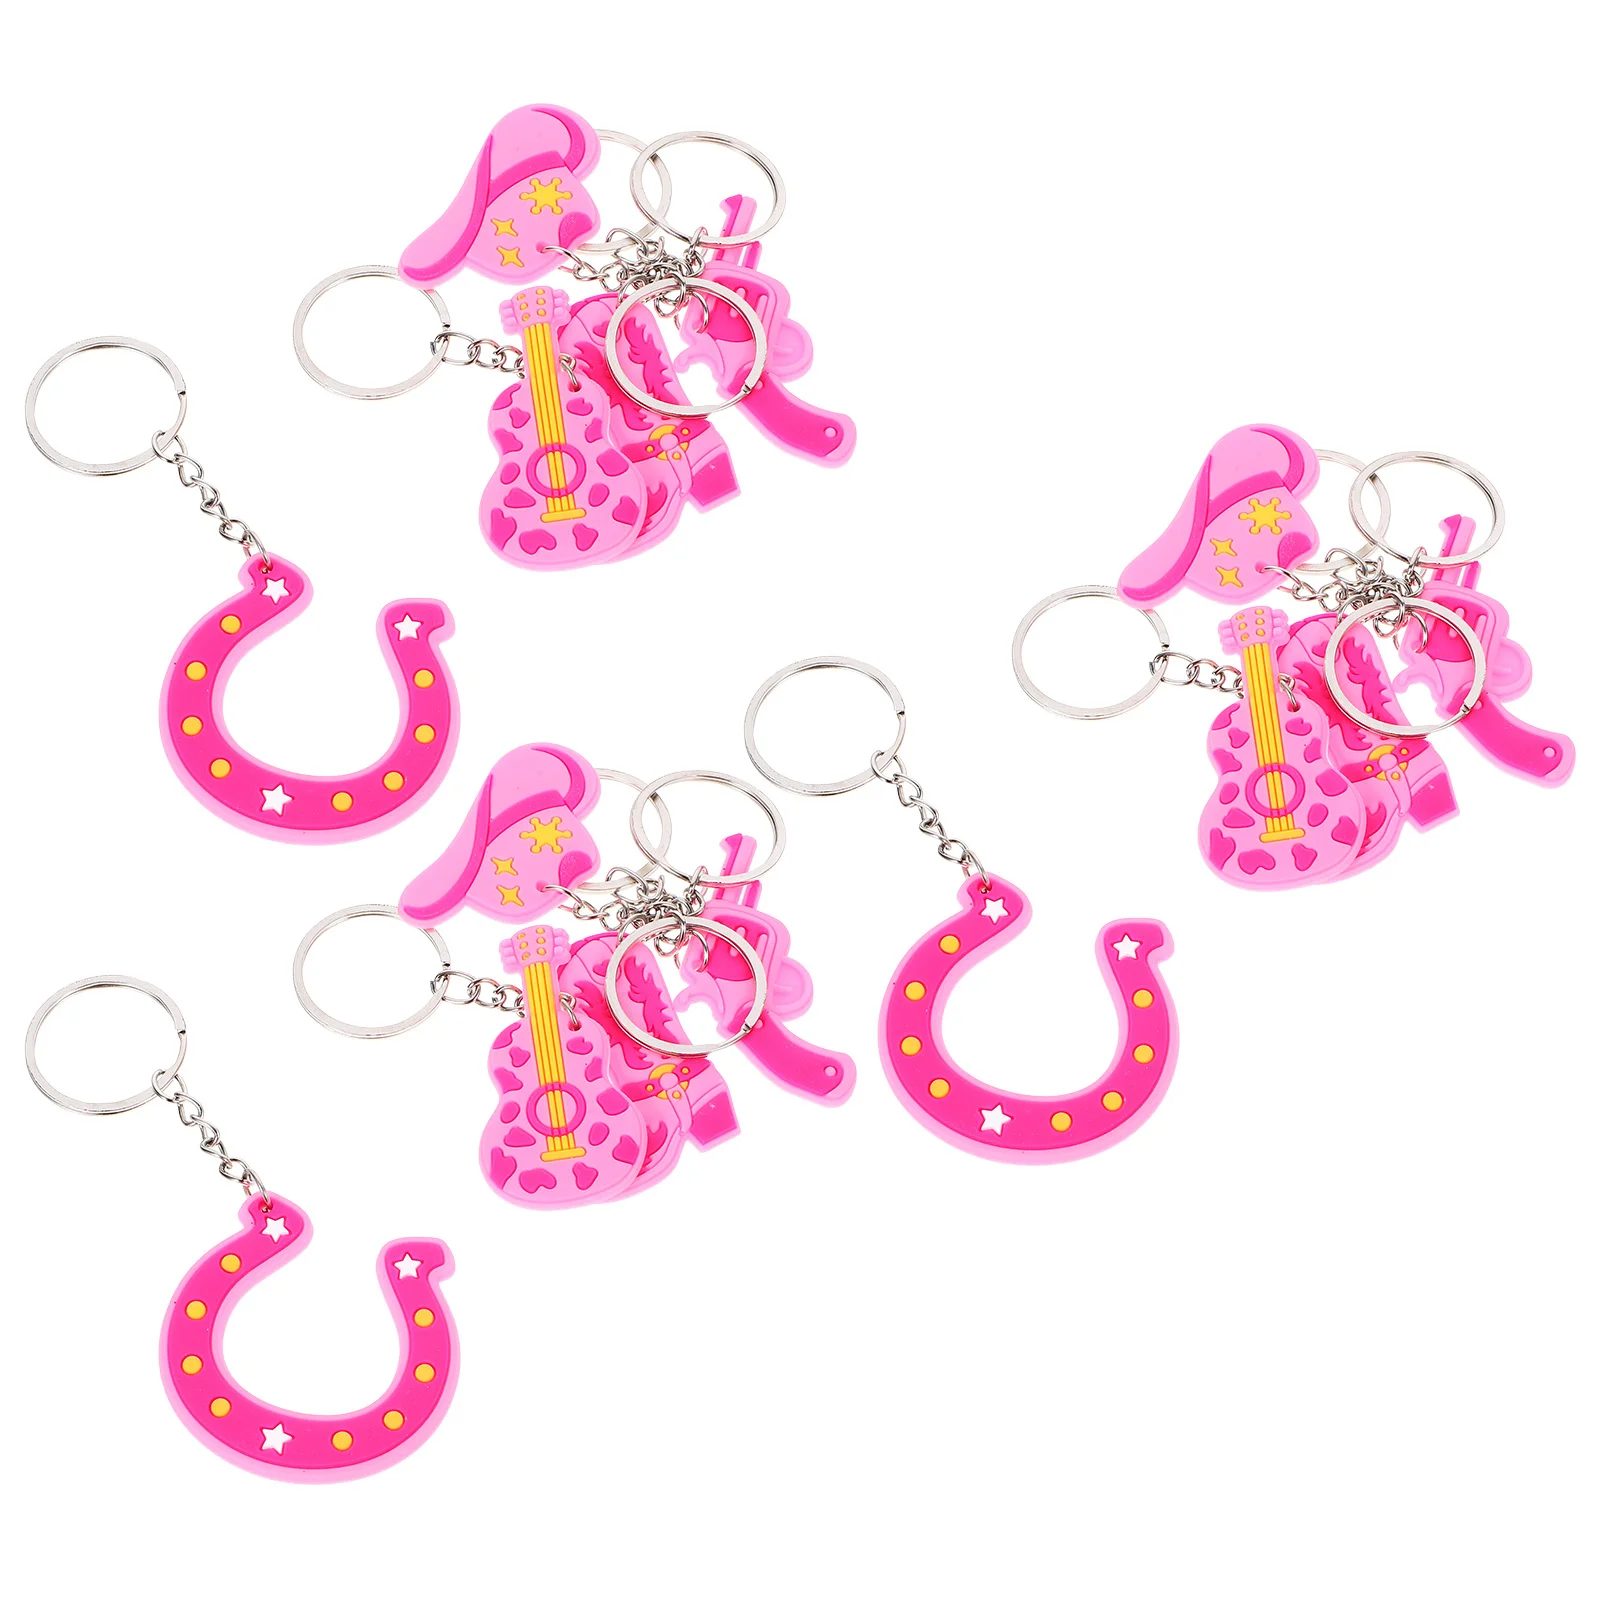 

15 Pcs Key Chain Hanging Ornament Memento Cowgirl Keychain Fob Novelty Keychains Hat